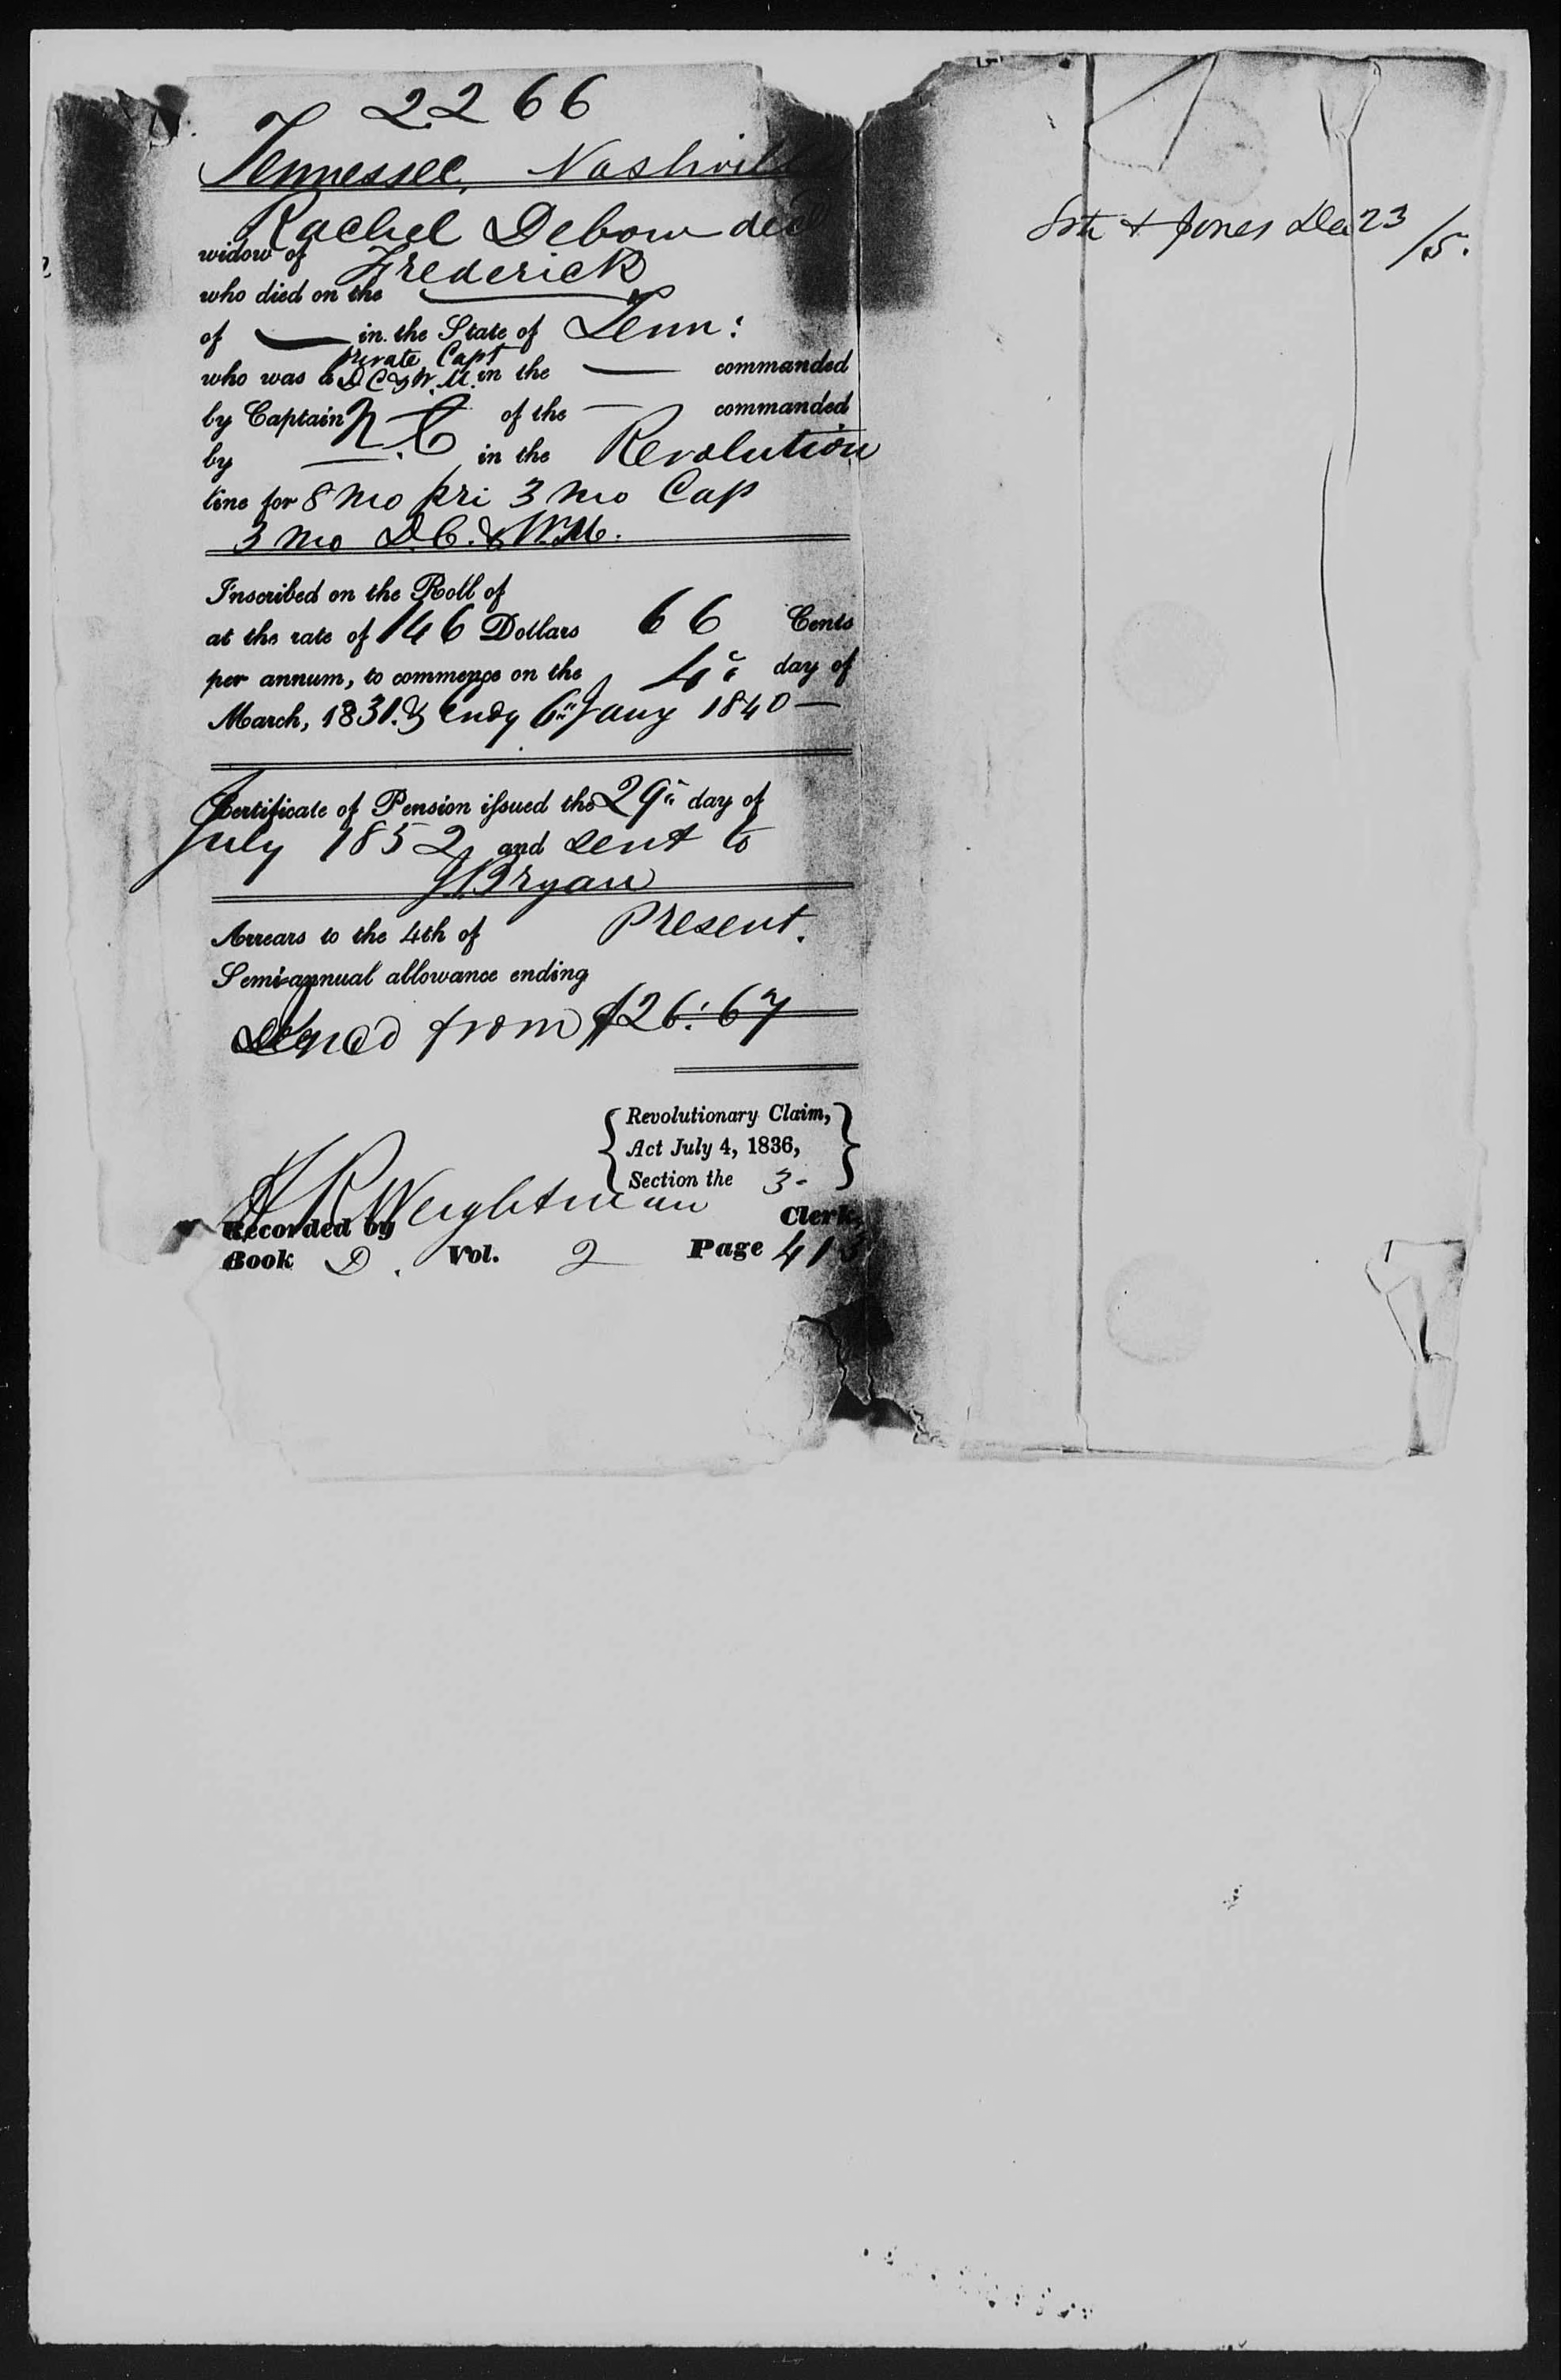 Docket for Widow's Pension from the U.S. Pension Office for Rachel Debow, 29 July 1852